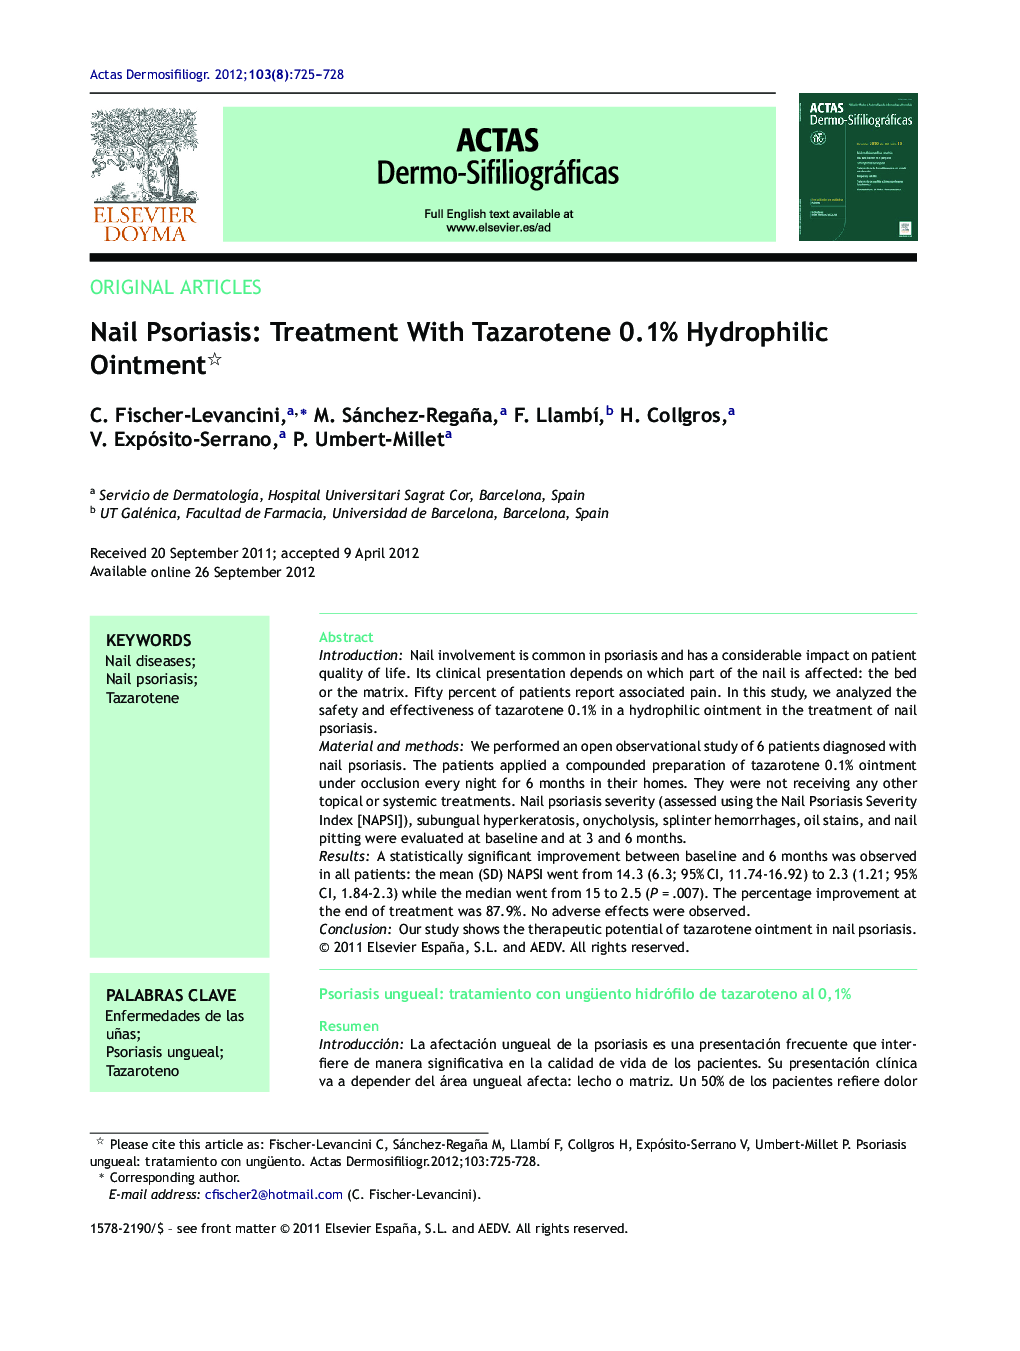 Nail Psoriasis: Treatment With Tazarotene 0.1% Hydrophilic Ointment 